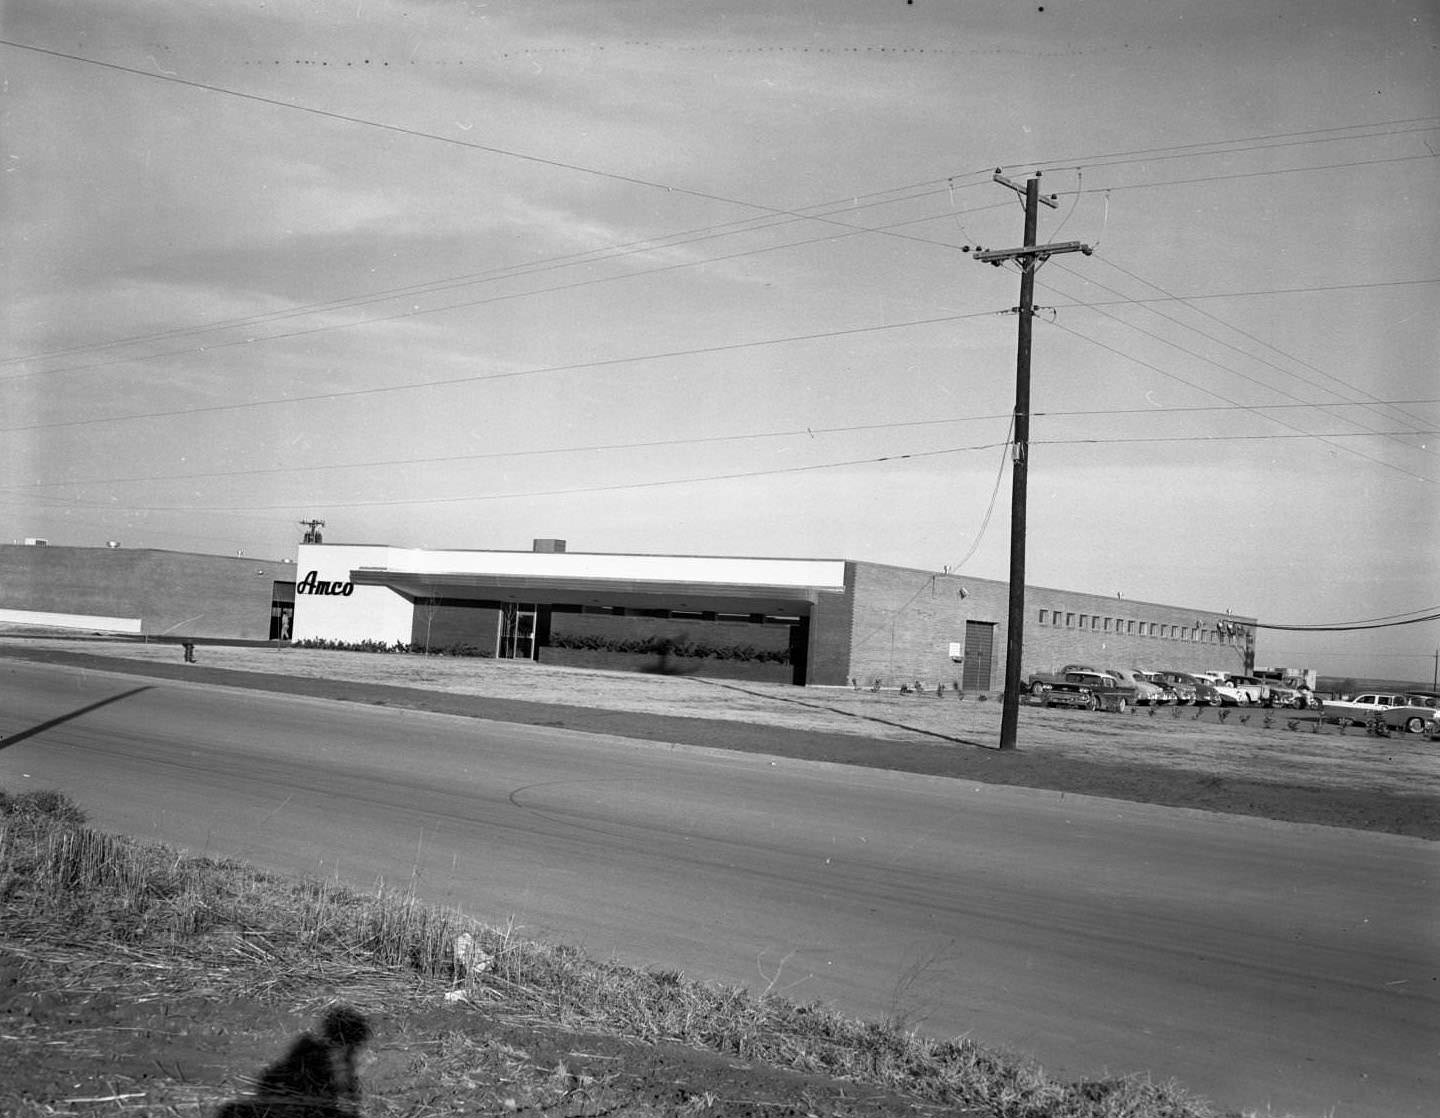 AMCO Manufacturing, 1958. To the side of the building, there are several cars parked in a parking lot. In the foreground, there is a street.